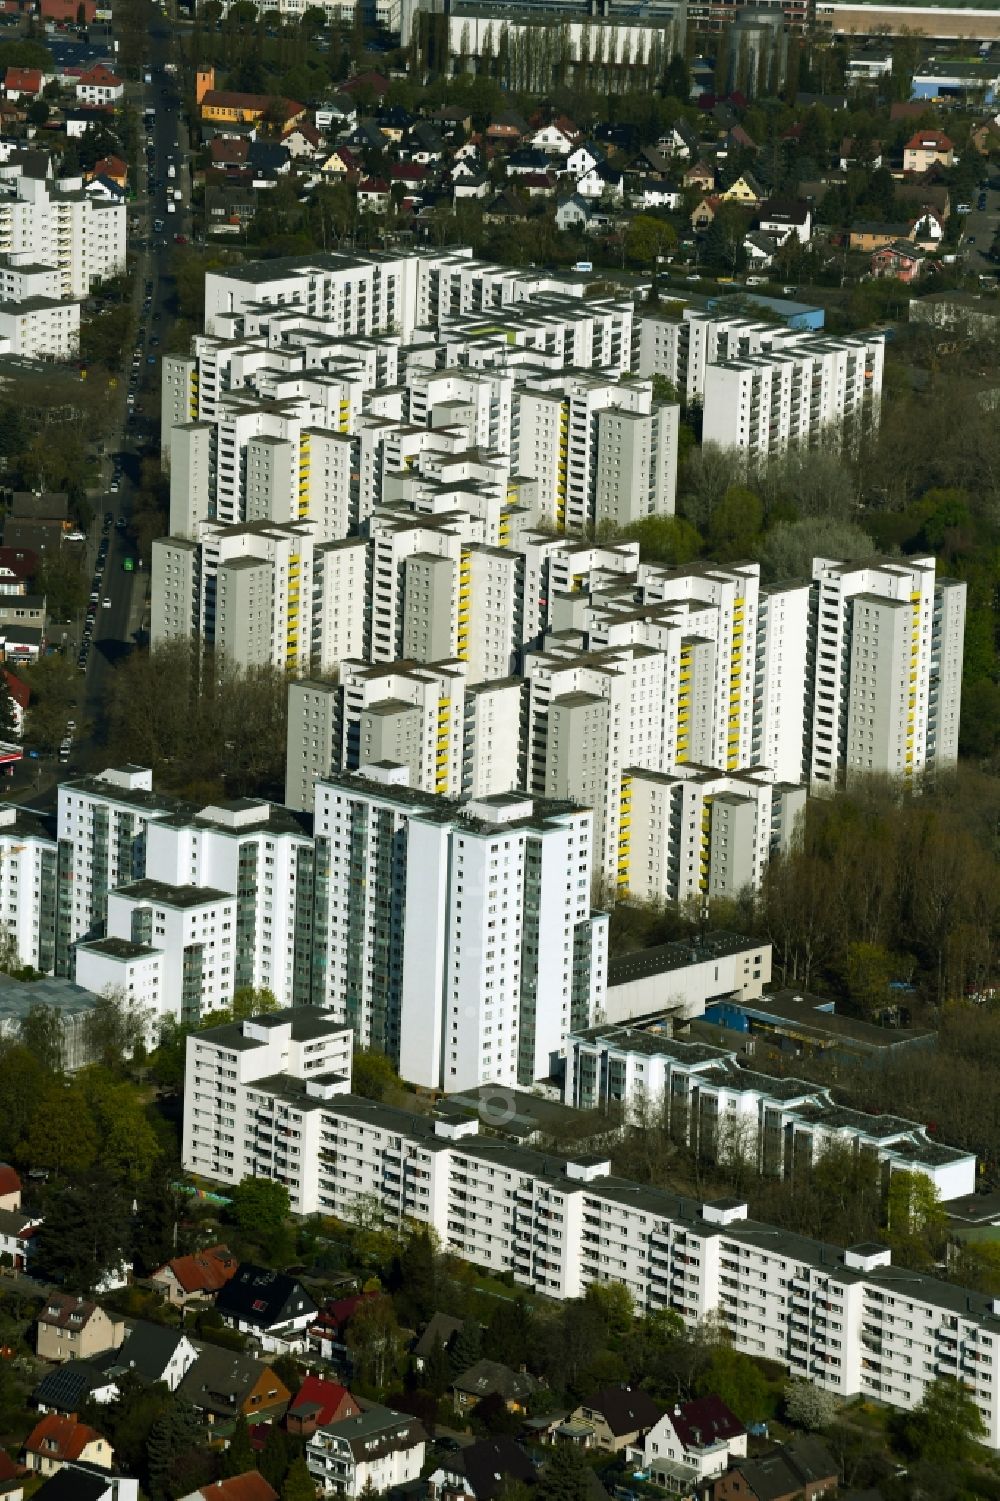 Berlin from above - Skyscrapers in the residential area of a??a??an industrially manufactured prefabricated housing estate on Heinzegraben in the Maerkisches Viertel district in Berlin, Germany